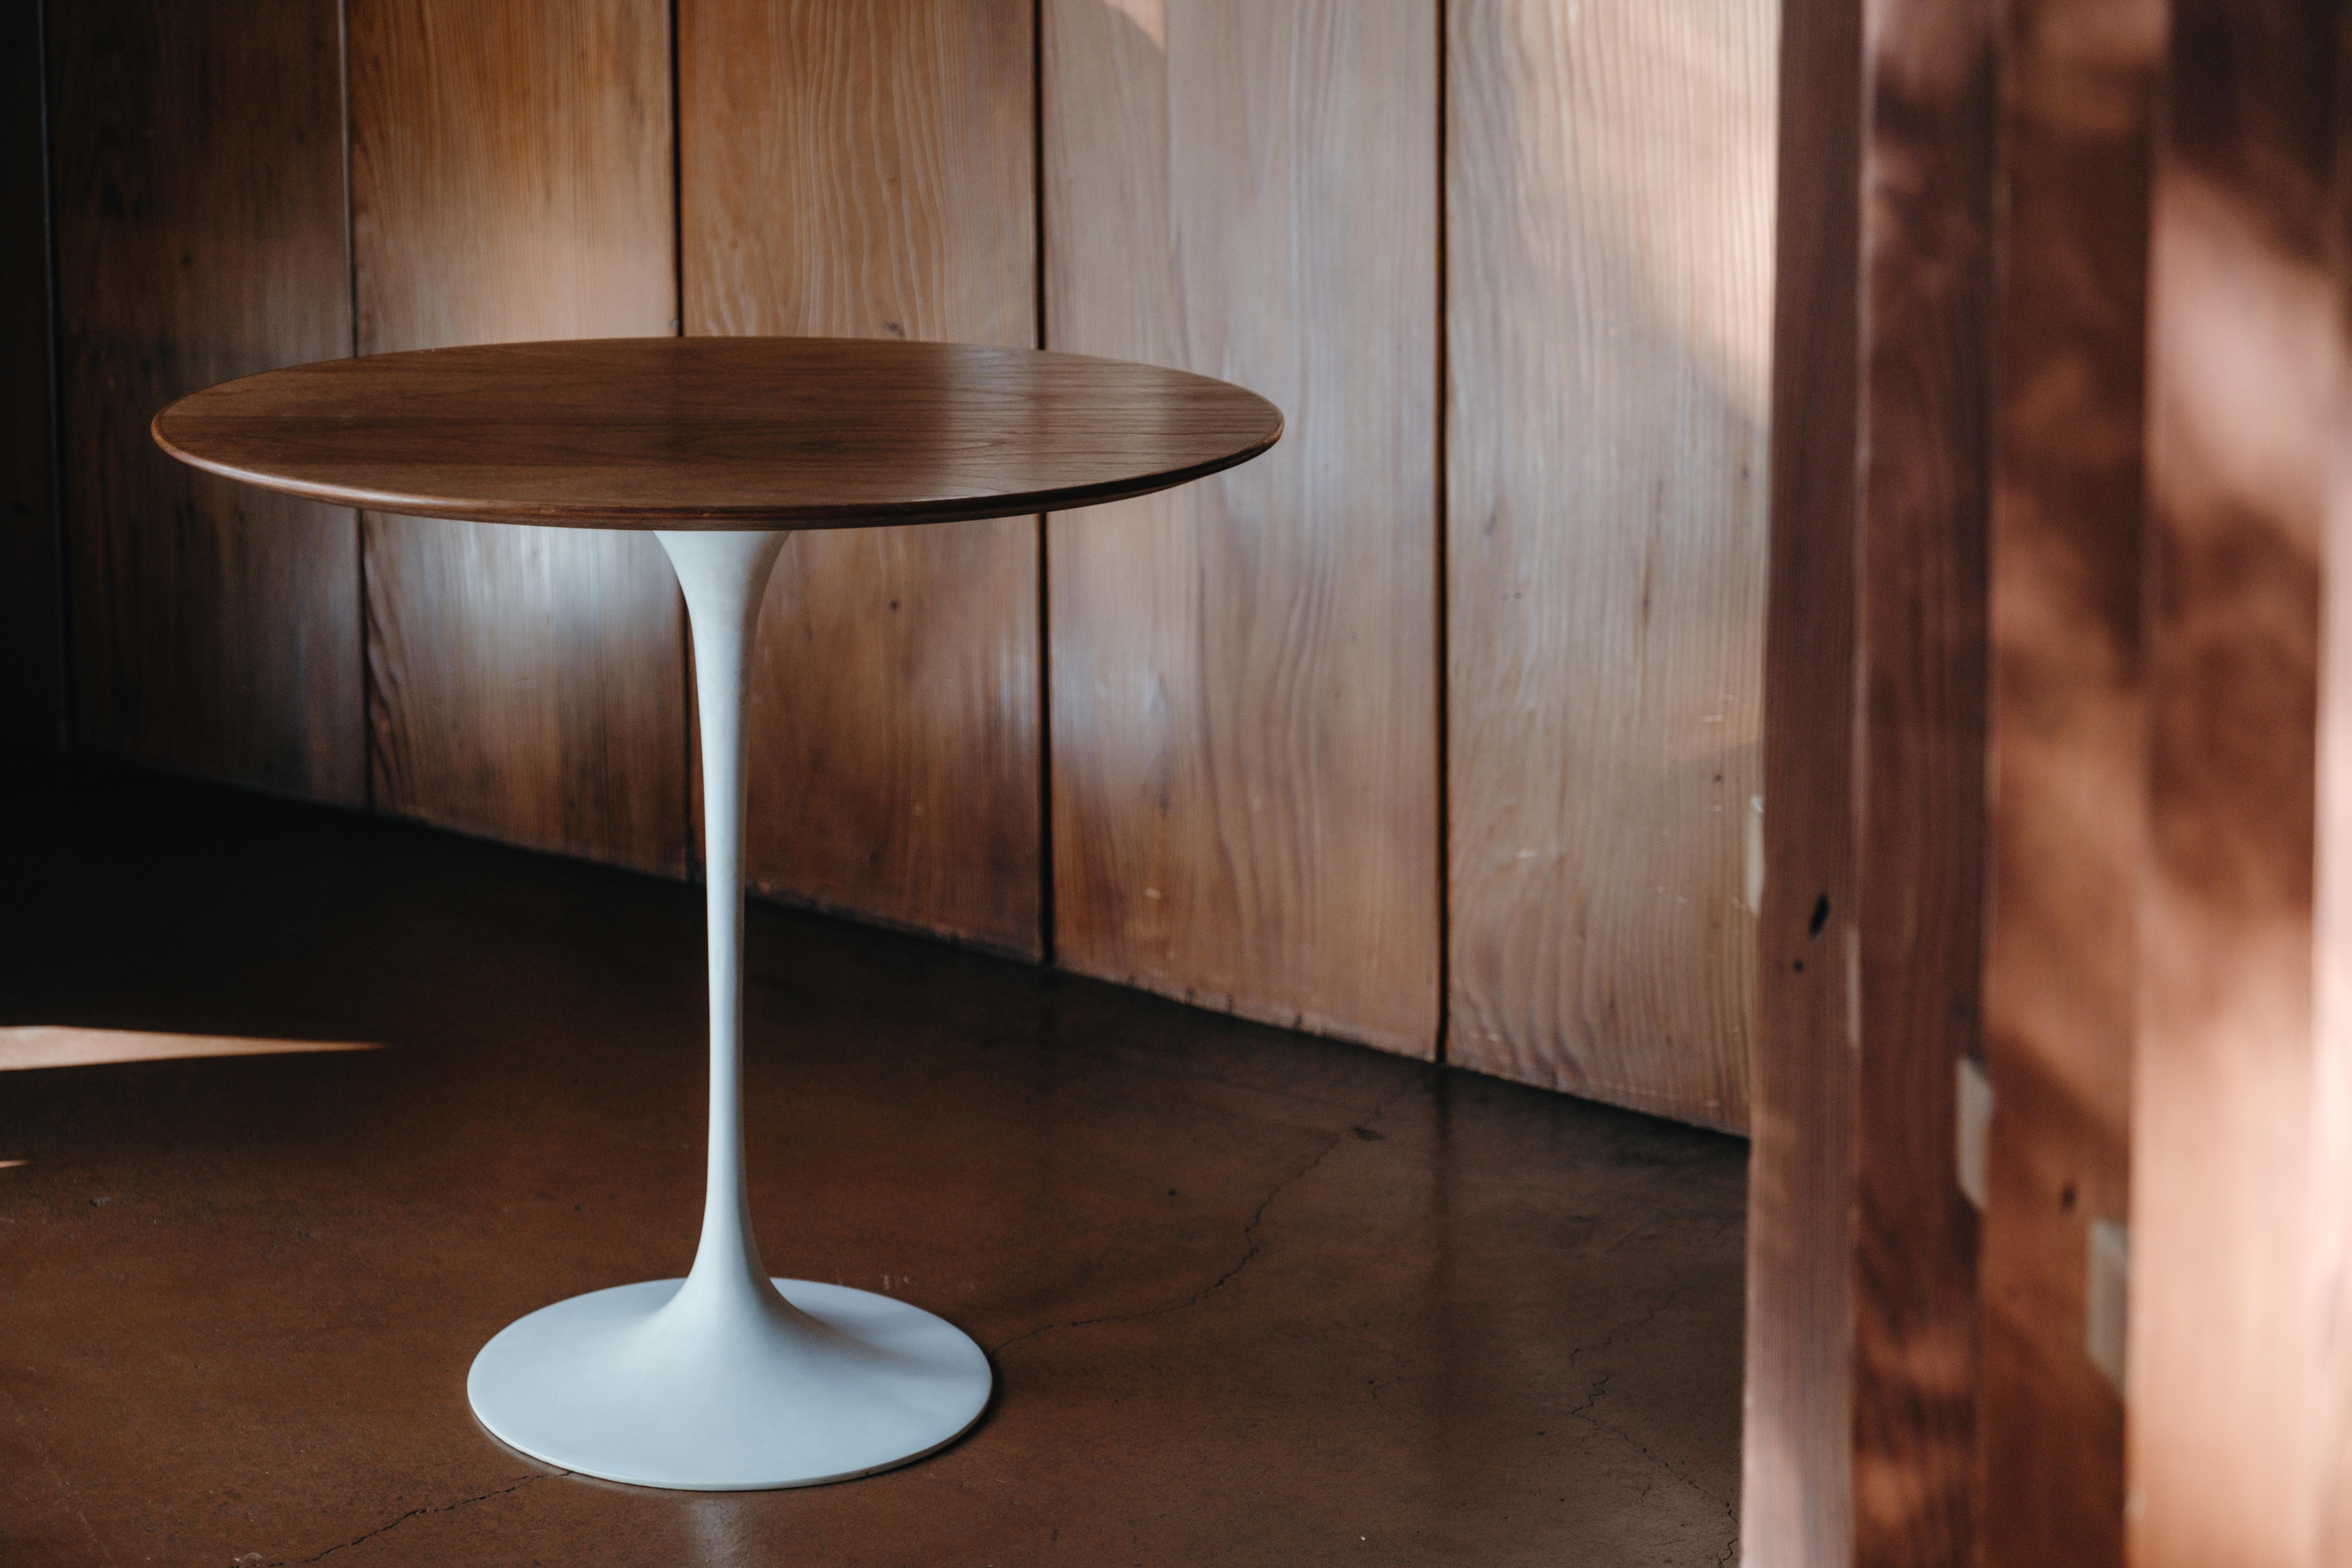 Rare 1960s Saarinen Oval Walnut Table with Early Knoll Label. Executed in beautifully grained walnut and enameled metal with original manufacturer's label affixed on the underside of the walnut table top. A clean and uniquely iconic design by one of